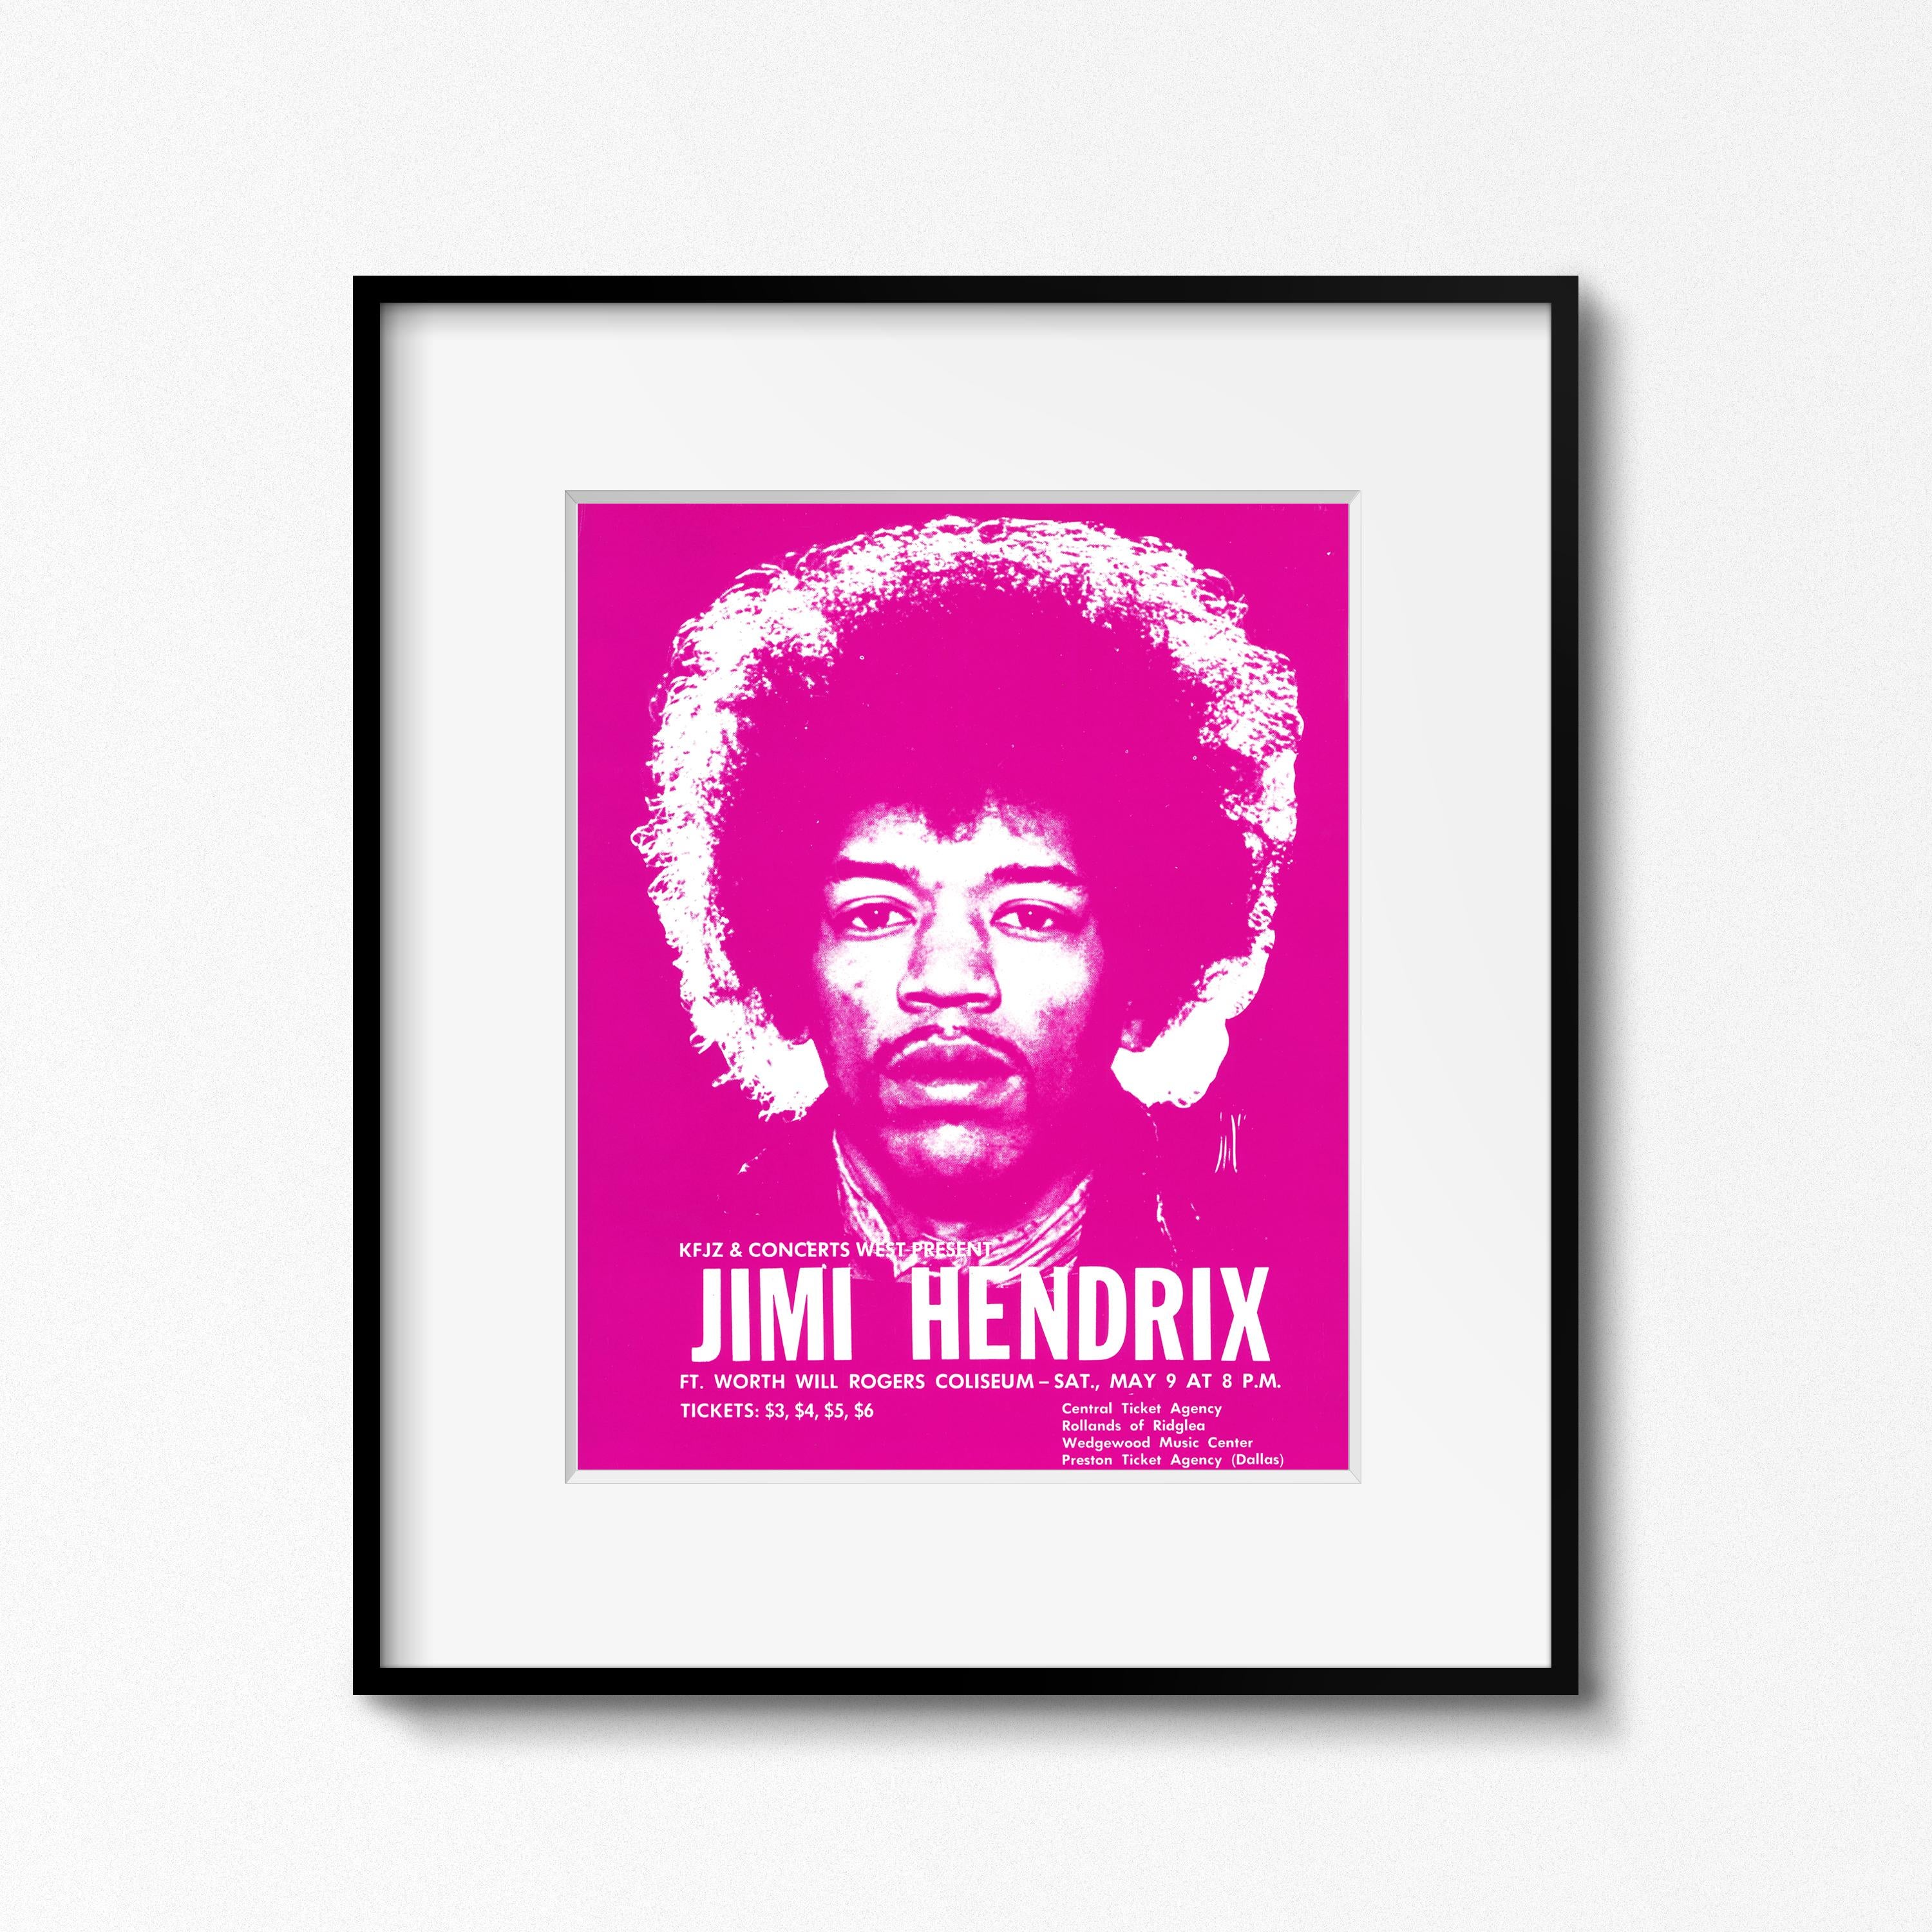 A striking handbill for a performance by Jimi Hendrix at the Will Rogers Coliseum in Ft. Worth, Texas, on 9th May 1970, during The Cry of Love Tour. The concert was a makeup show for a cancelled performance at the Will Rogers Coliseum, originally